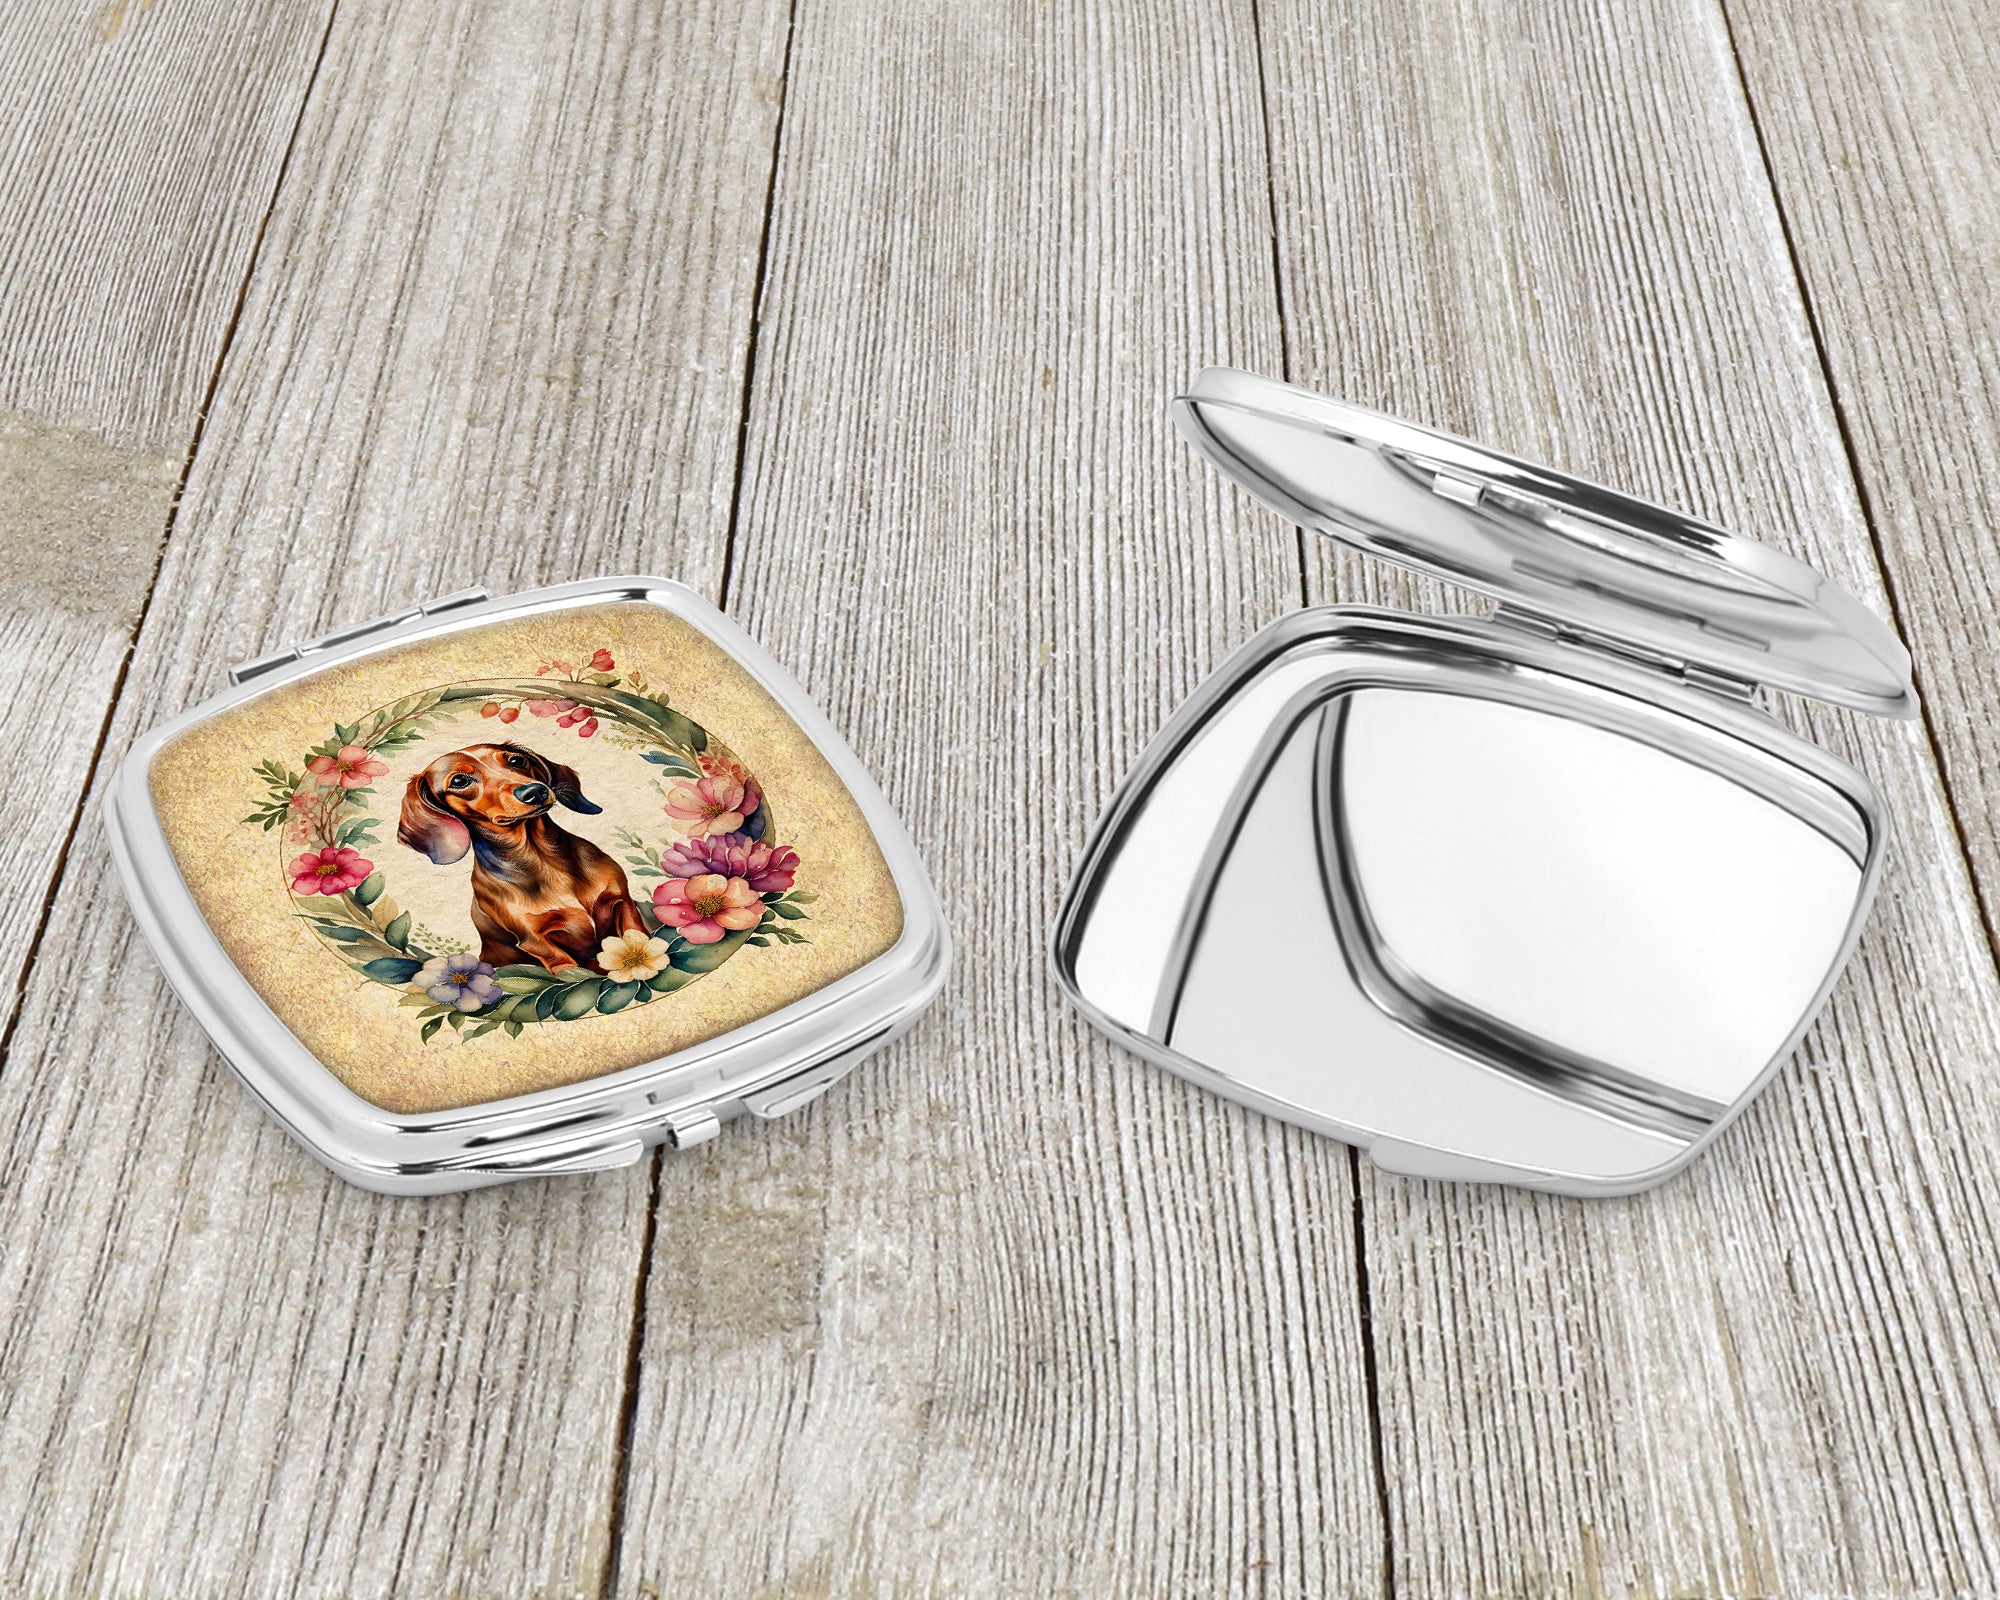 Dachshund and Flowers Compact Mirror